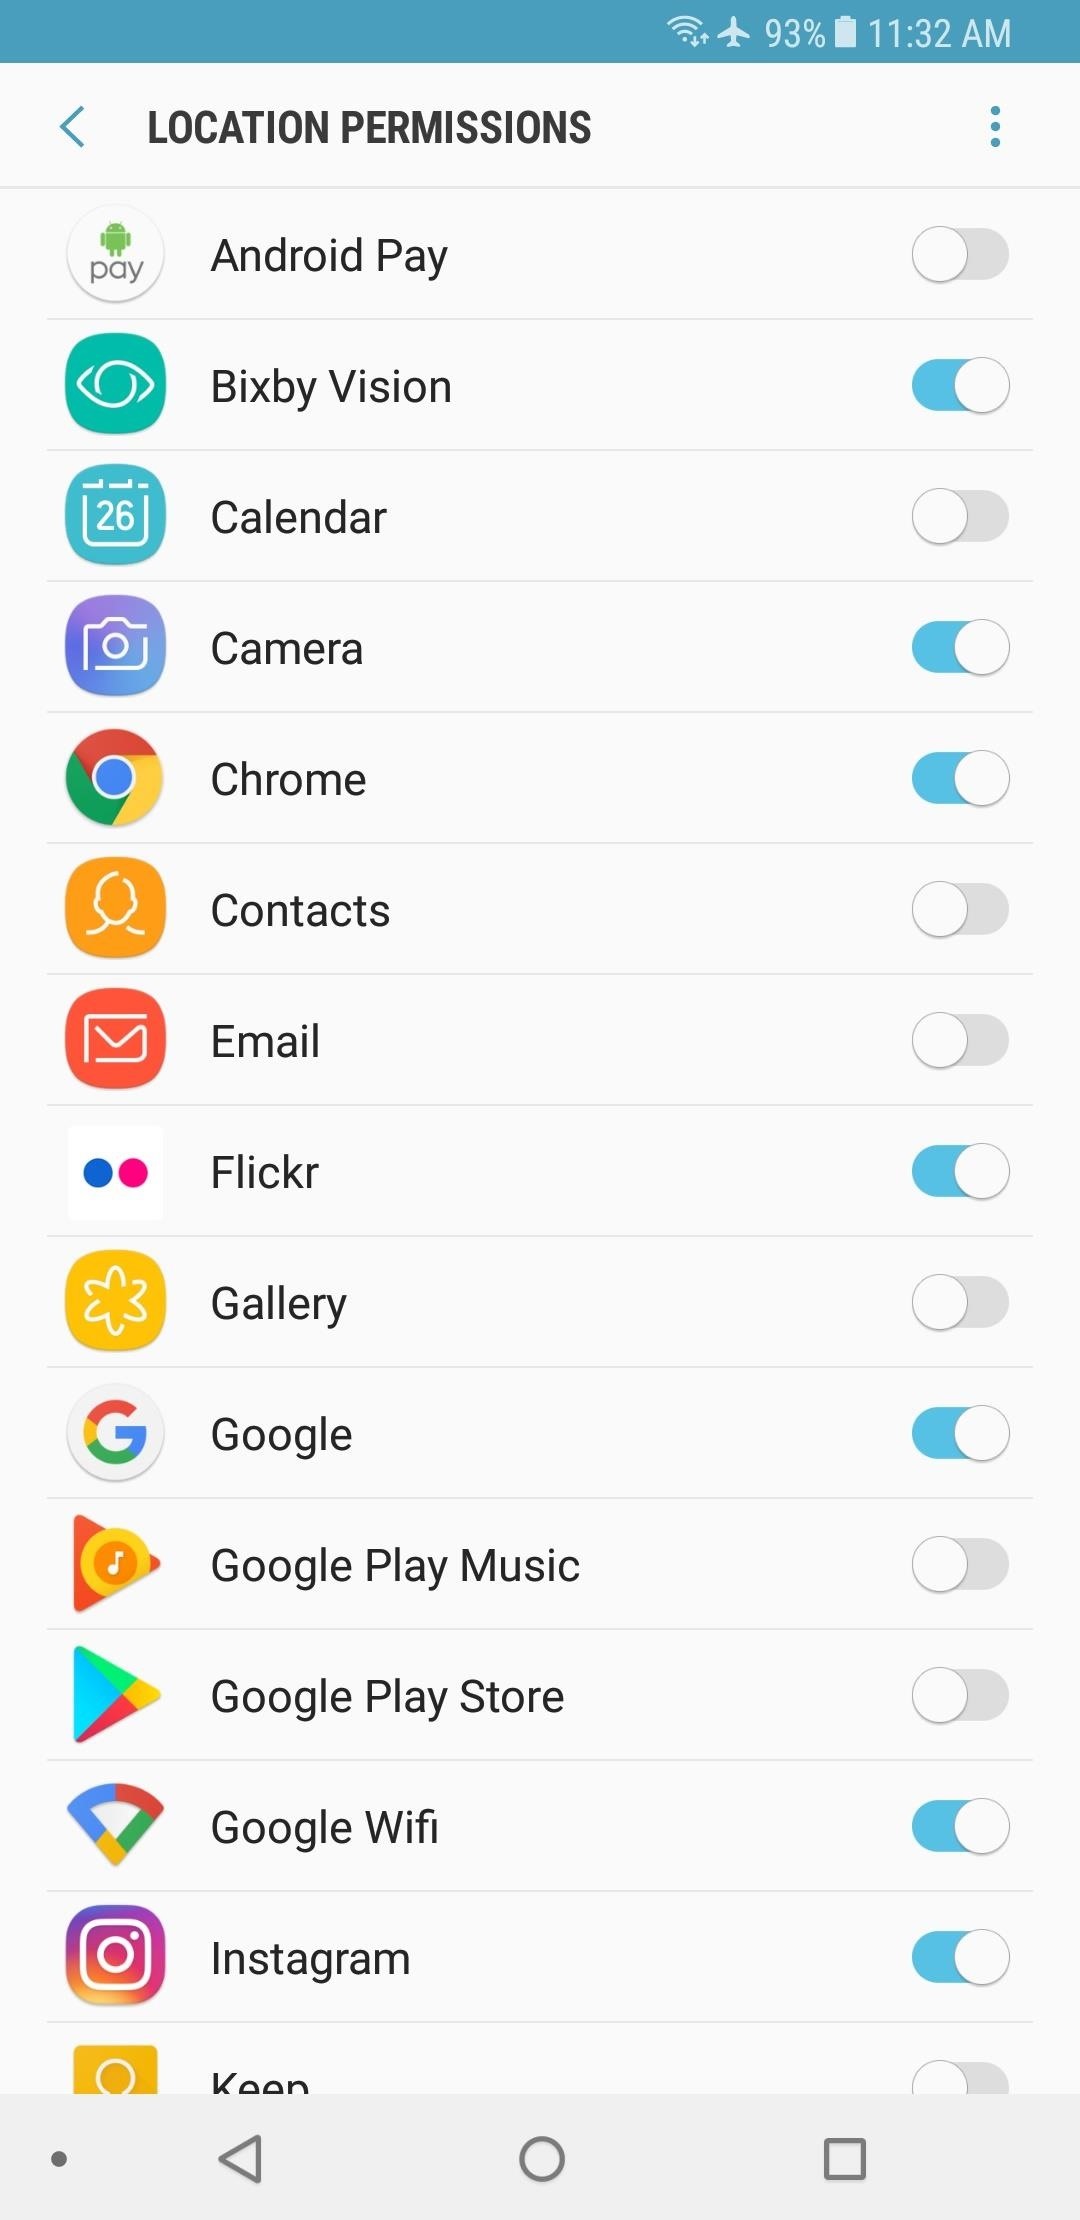 Everything You Need to Disable on Your Galaxy S8 or S8+ for Privacy & Security